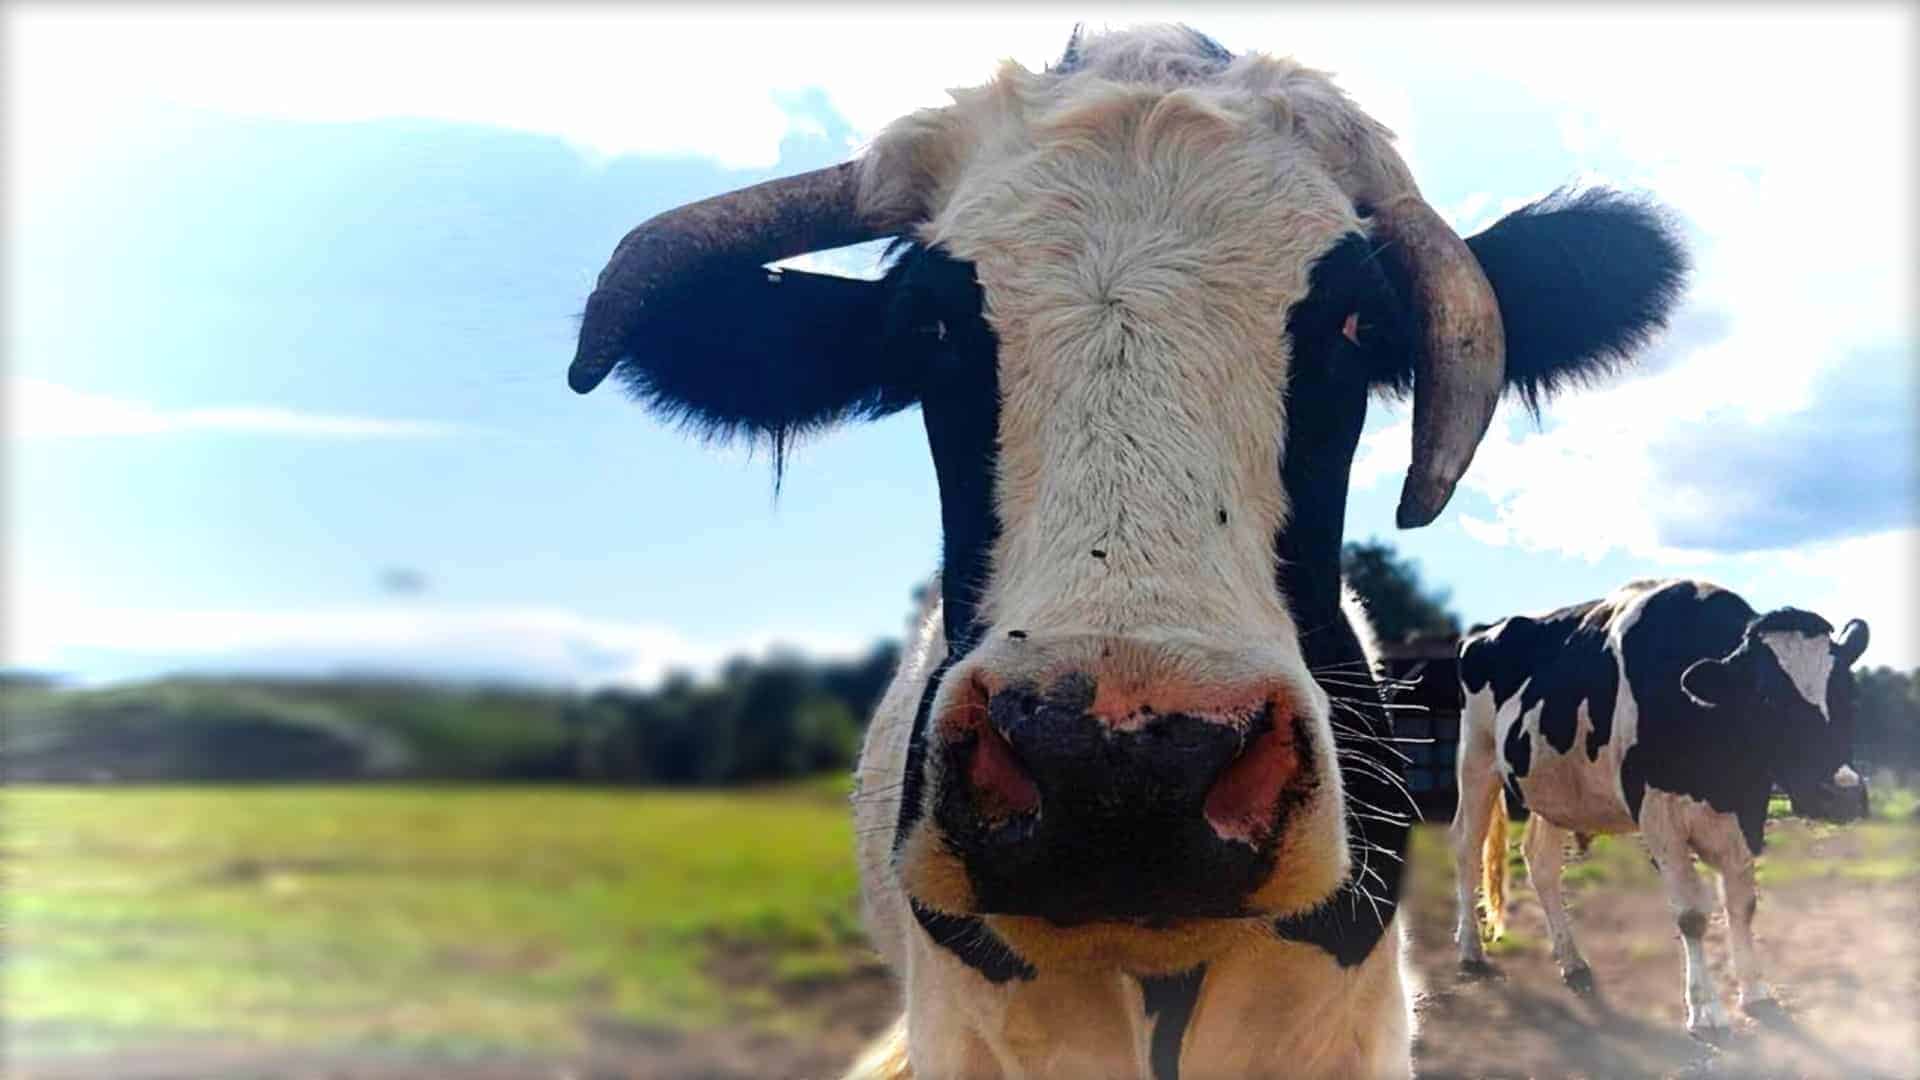 The image shows a close-up of Fargo, a beautiful cow that is now happily living at the Sasha Farm Animal Sanctuary.